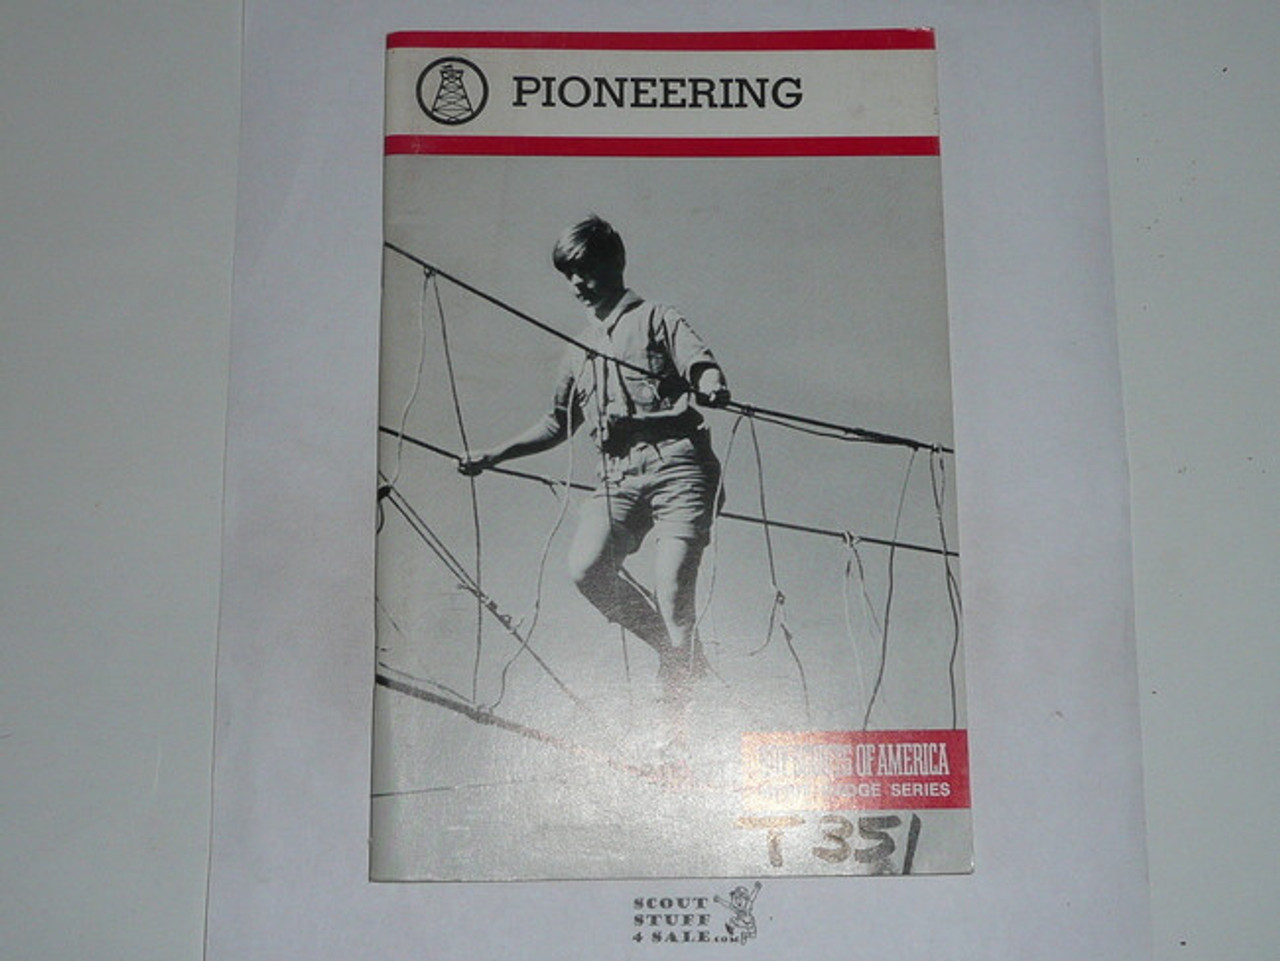 Pioneering Merit Badge Pamphlet, Type 9, Red Band Cover, 2-85 Printing